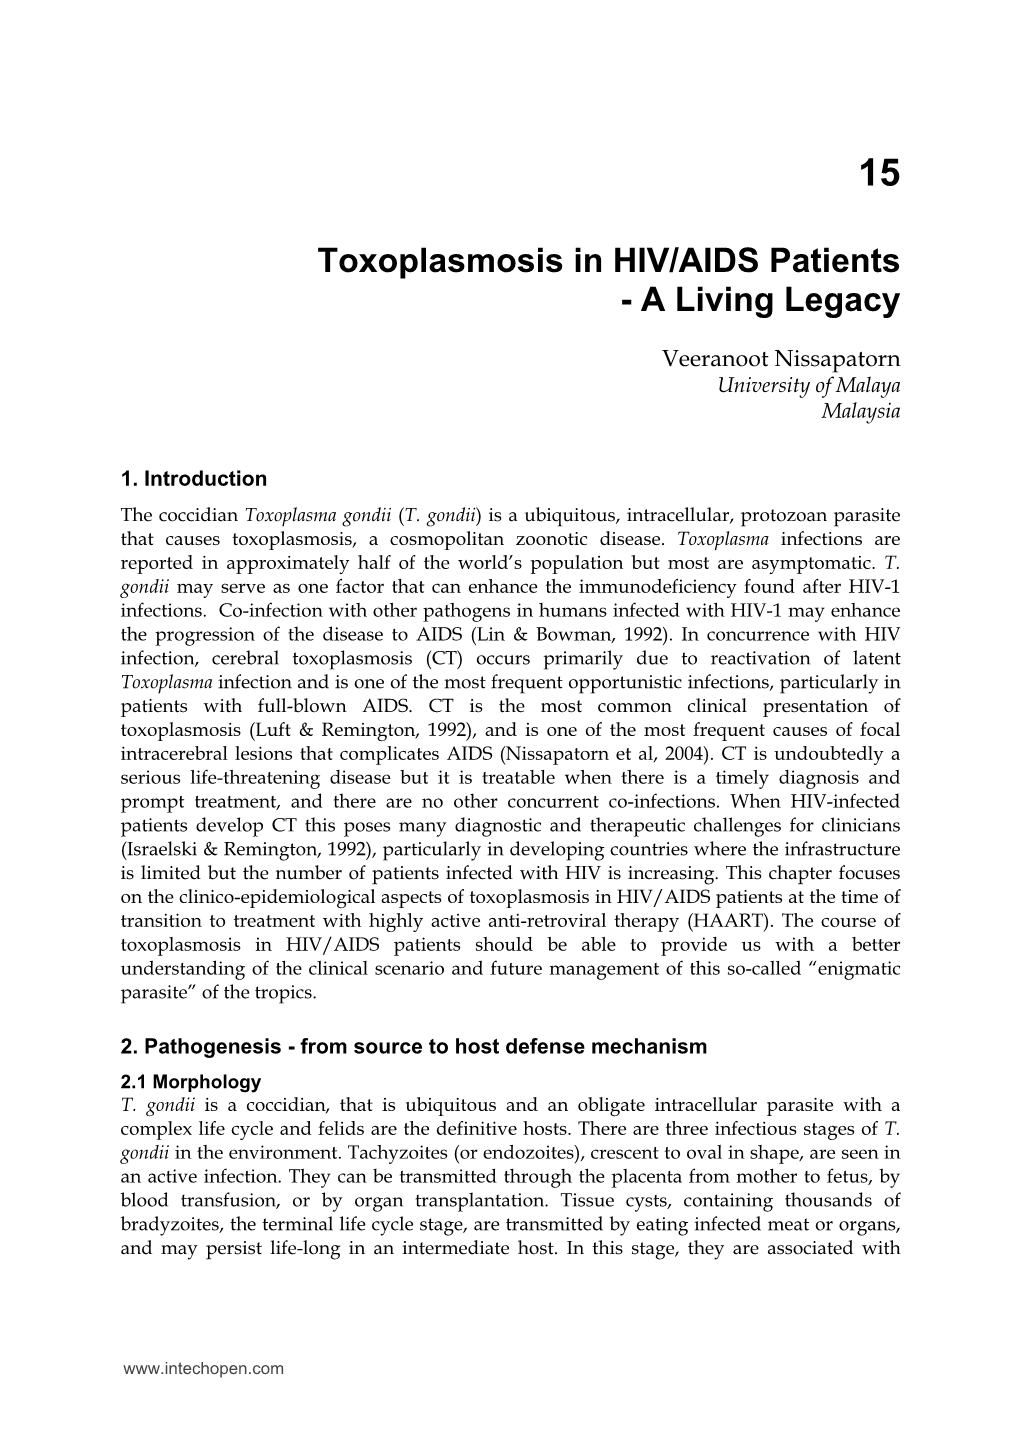 Toxoplasmosis in HIV/AIDS Patients - a Living Legacy